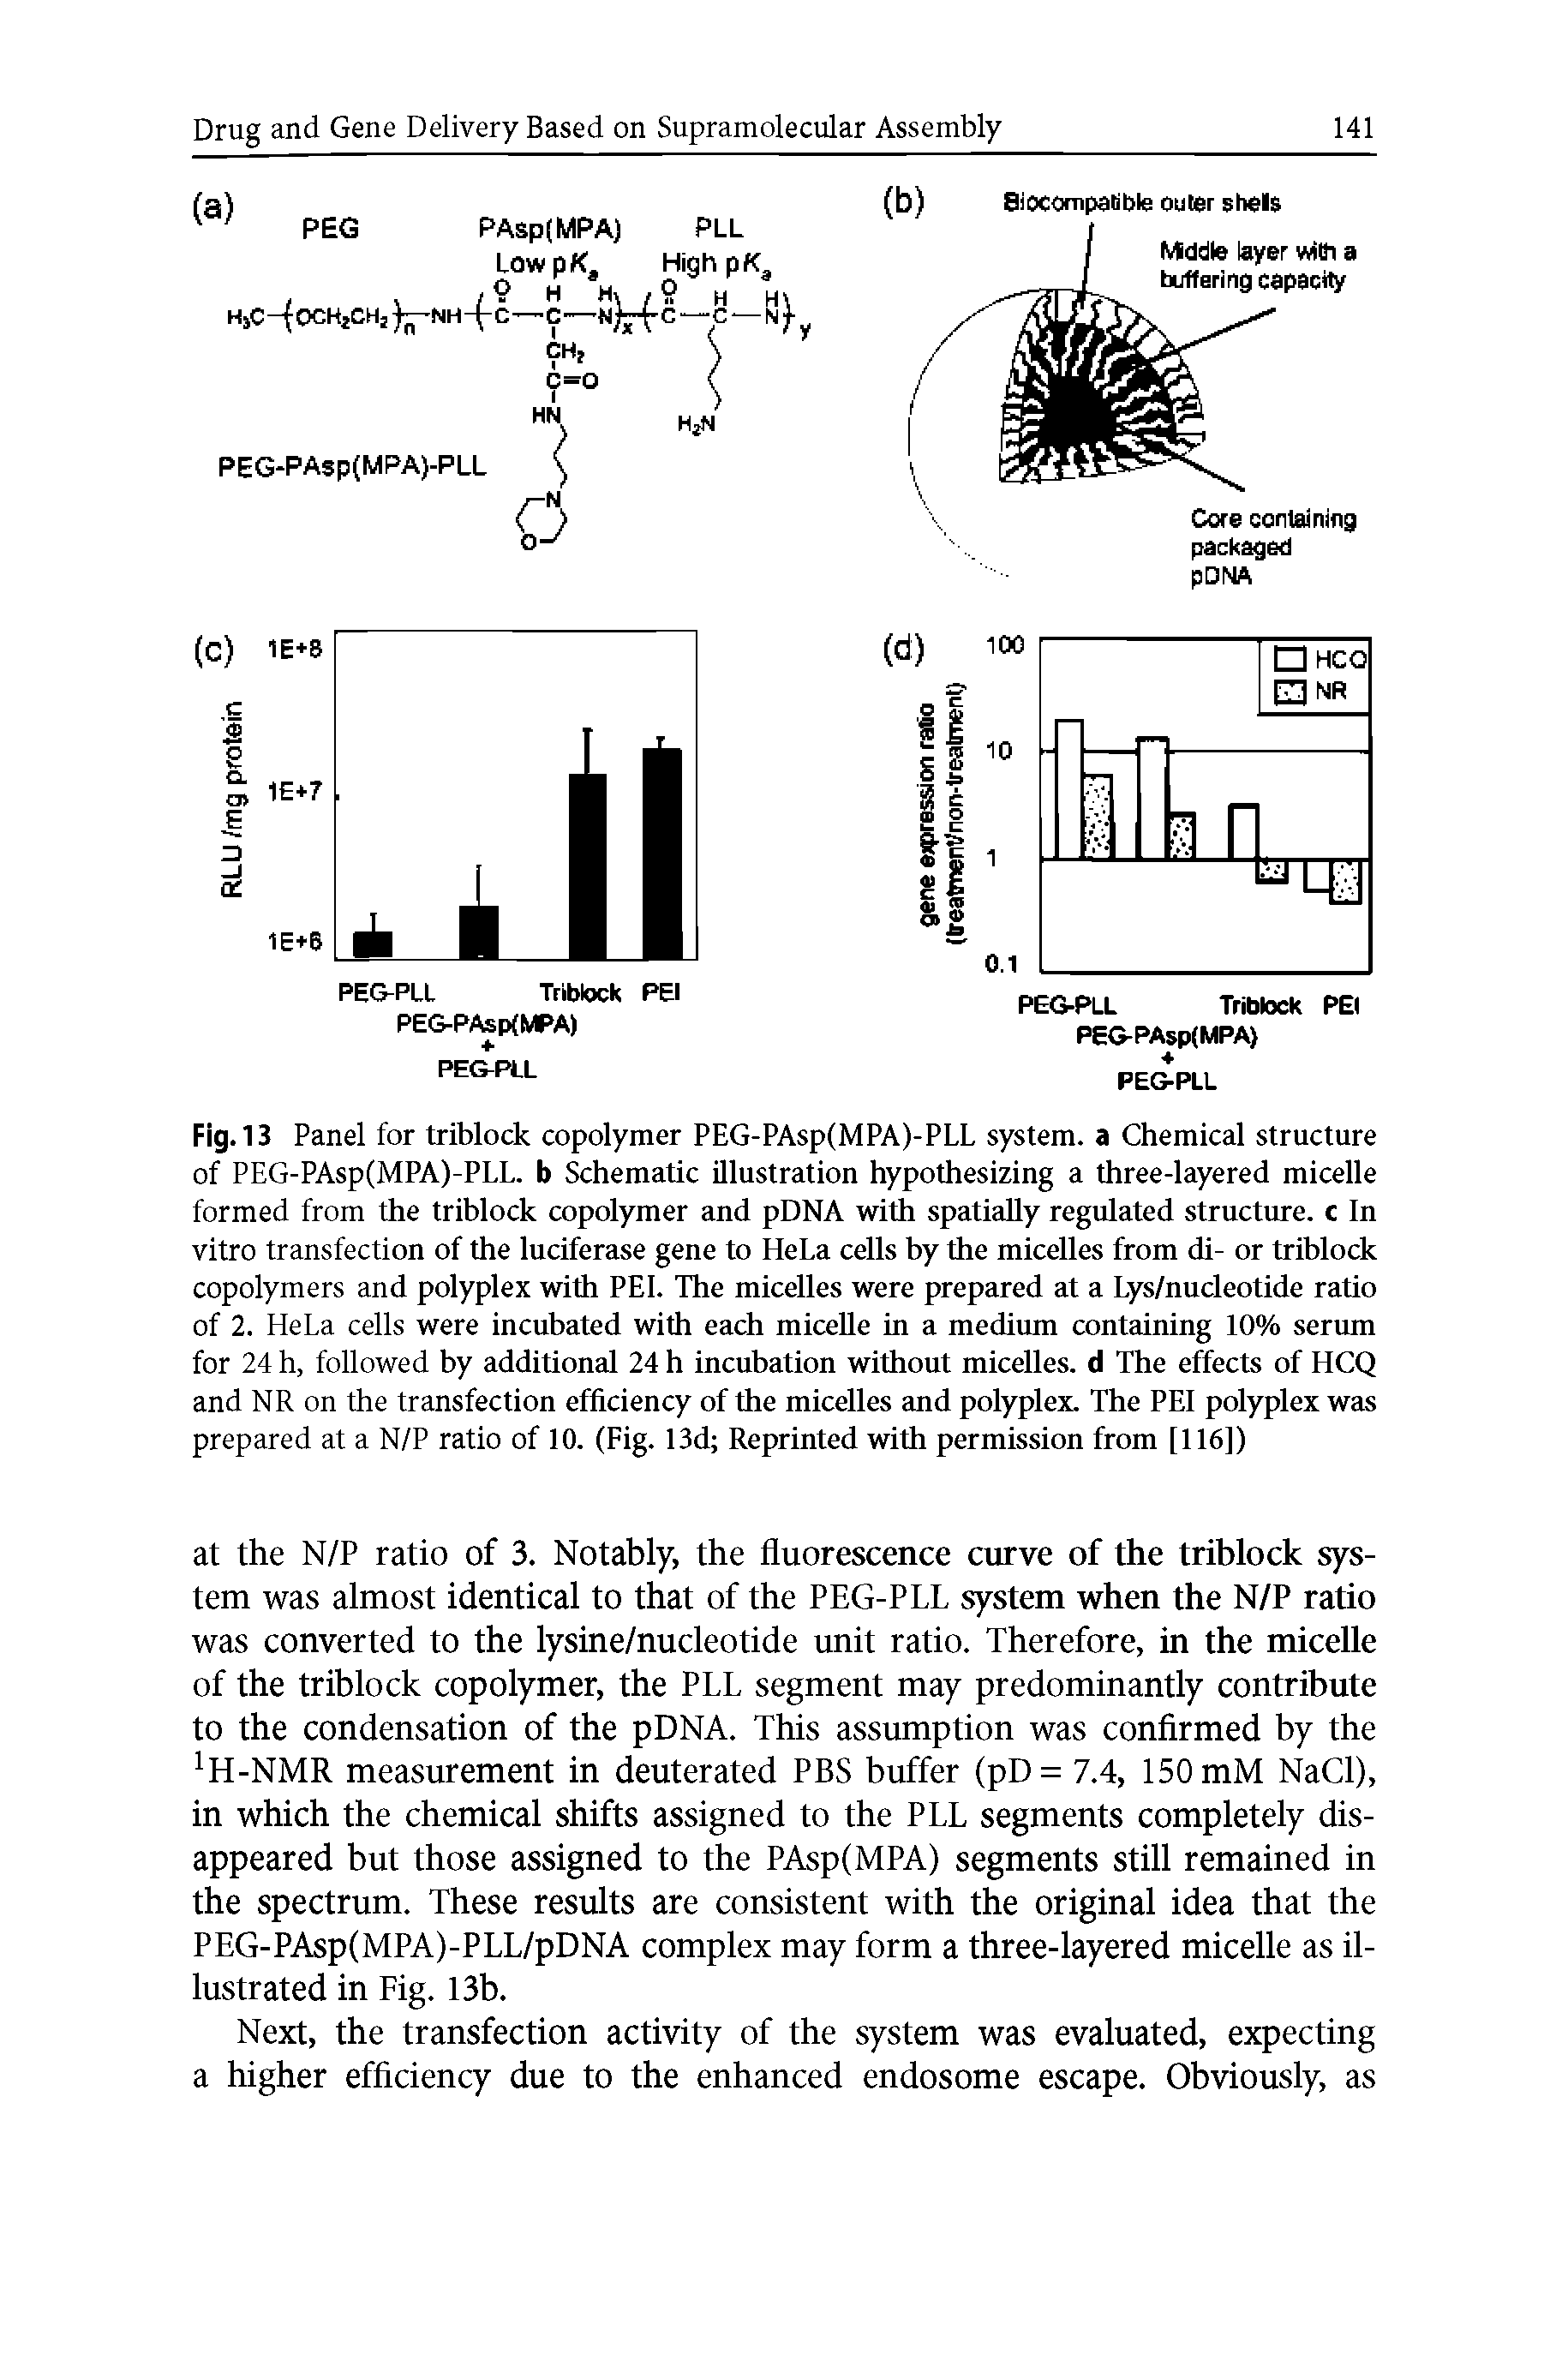 Fig. 13 Panel for triblock copolymer PEG-PAsp(MPA)-PLL system, a Chemical structure of PEG-PAsp(MPA)-PLL. b Schematic illustration hypothesizing a three-layered micelle formed from the triblock copolymer and pDNA with spatially regulated structure, c In vitro transfection of the luciferase gene to HeLa cells by the micelles from di- or triblock copolymers and polyplex with PEI. The micelles were prepared at a Lys/nucleotide ratio of 2. HeLa cells were incubated with each micelle in a mediiun containing 10% serinn for 24 h, followed by additional 24 h incnbation withont micelles, d The effects of HCQ and NR on the transfection efficiency of the micelles and polyplex. The PEI polyplex was prepared at a N/P ratio of 10. (Fig. 13d Reprinted with permission from [116])...